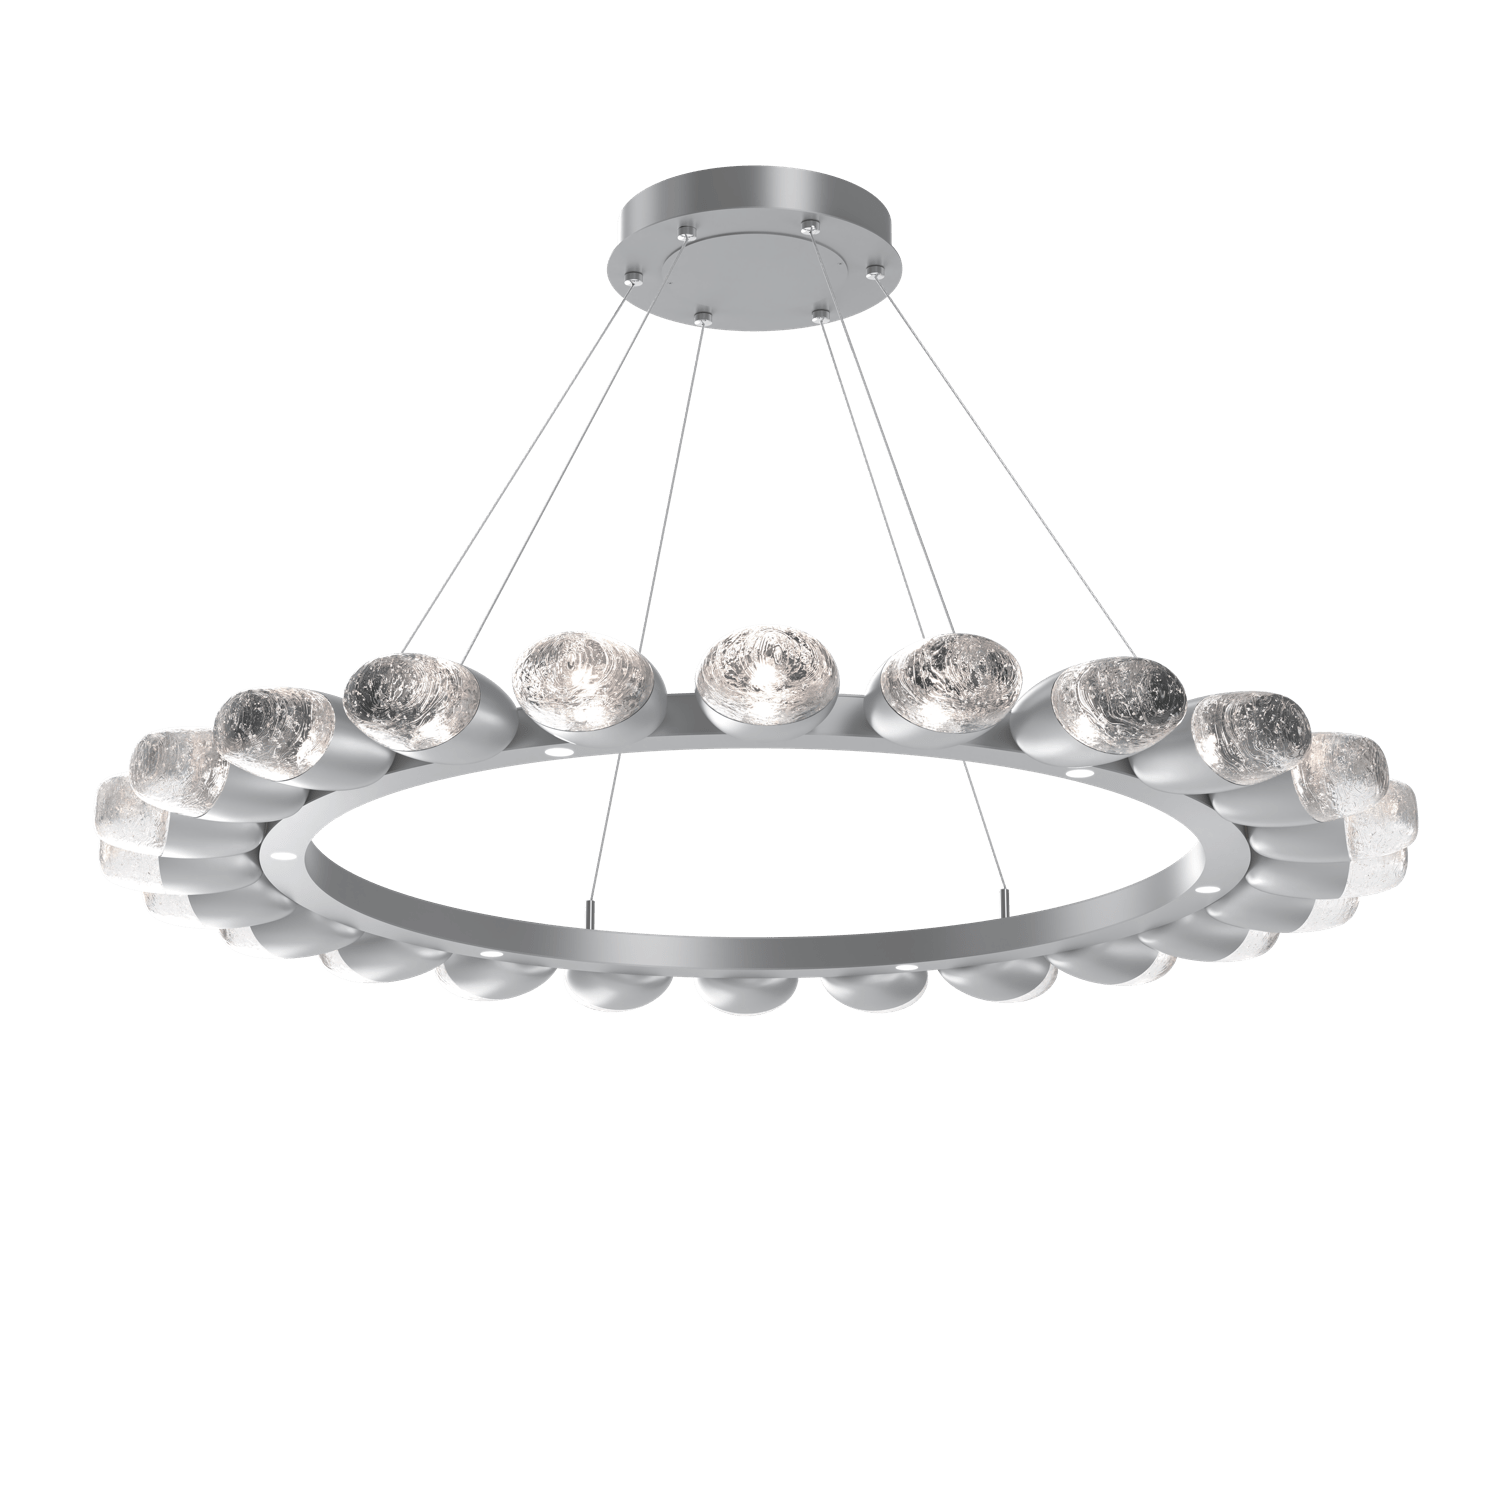 CHB0079-48-CS-Hammerton-Studio-Pebble-48-inch-radial-ring-chandelier-with-classic-silver-finish-and-clear-cast-glass-shades-and-LED-lamping